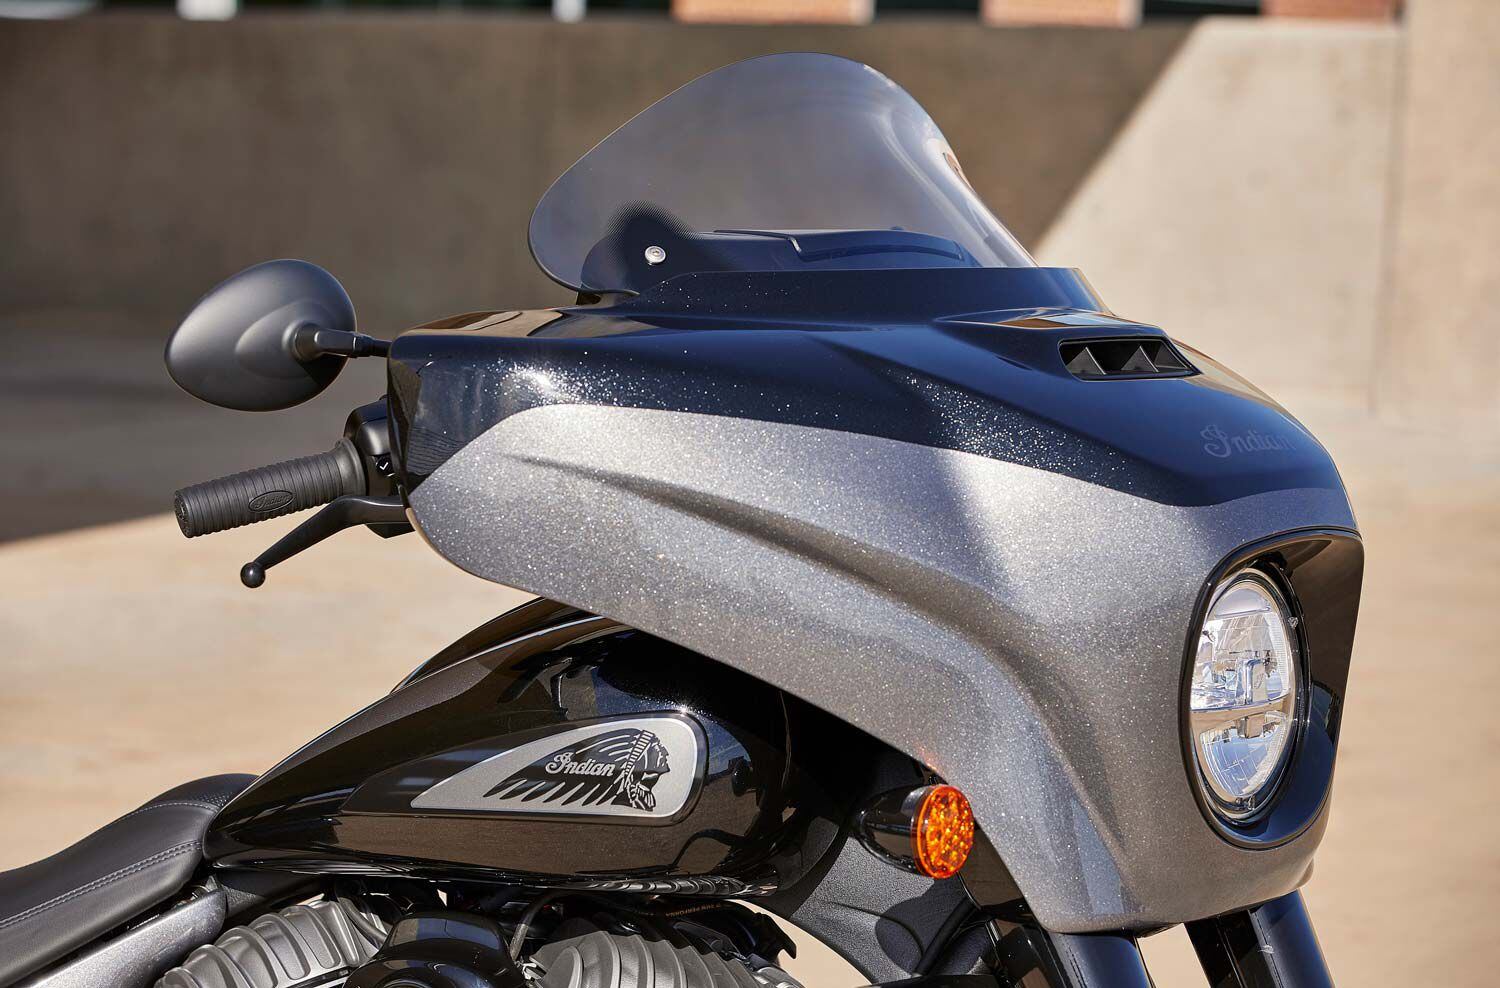 The adjustable tinted shield and streamlined fairing also return unchanged for 2021.